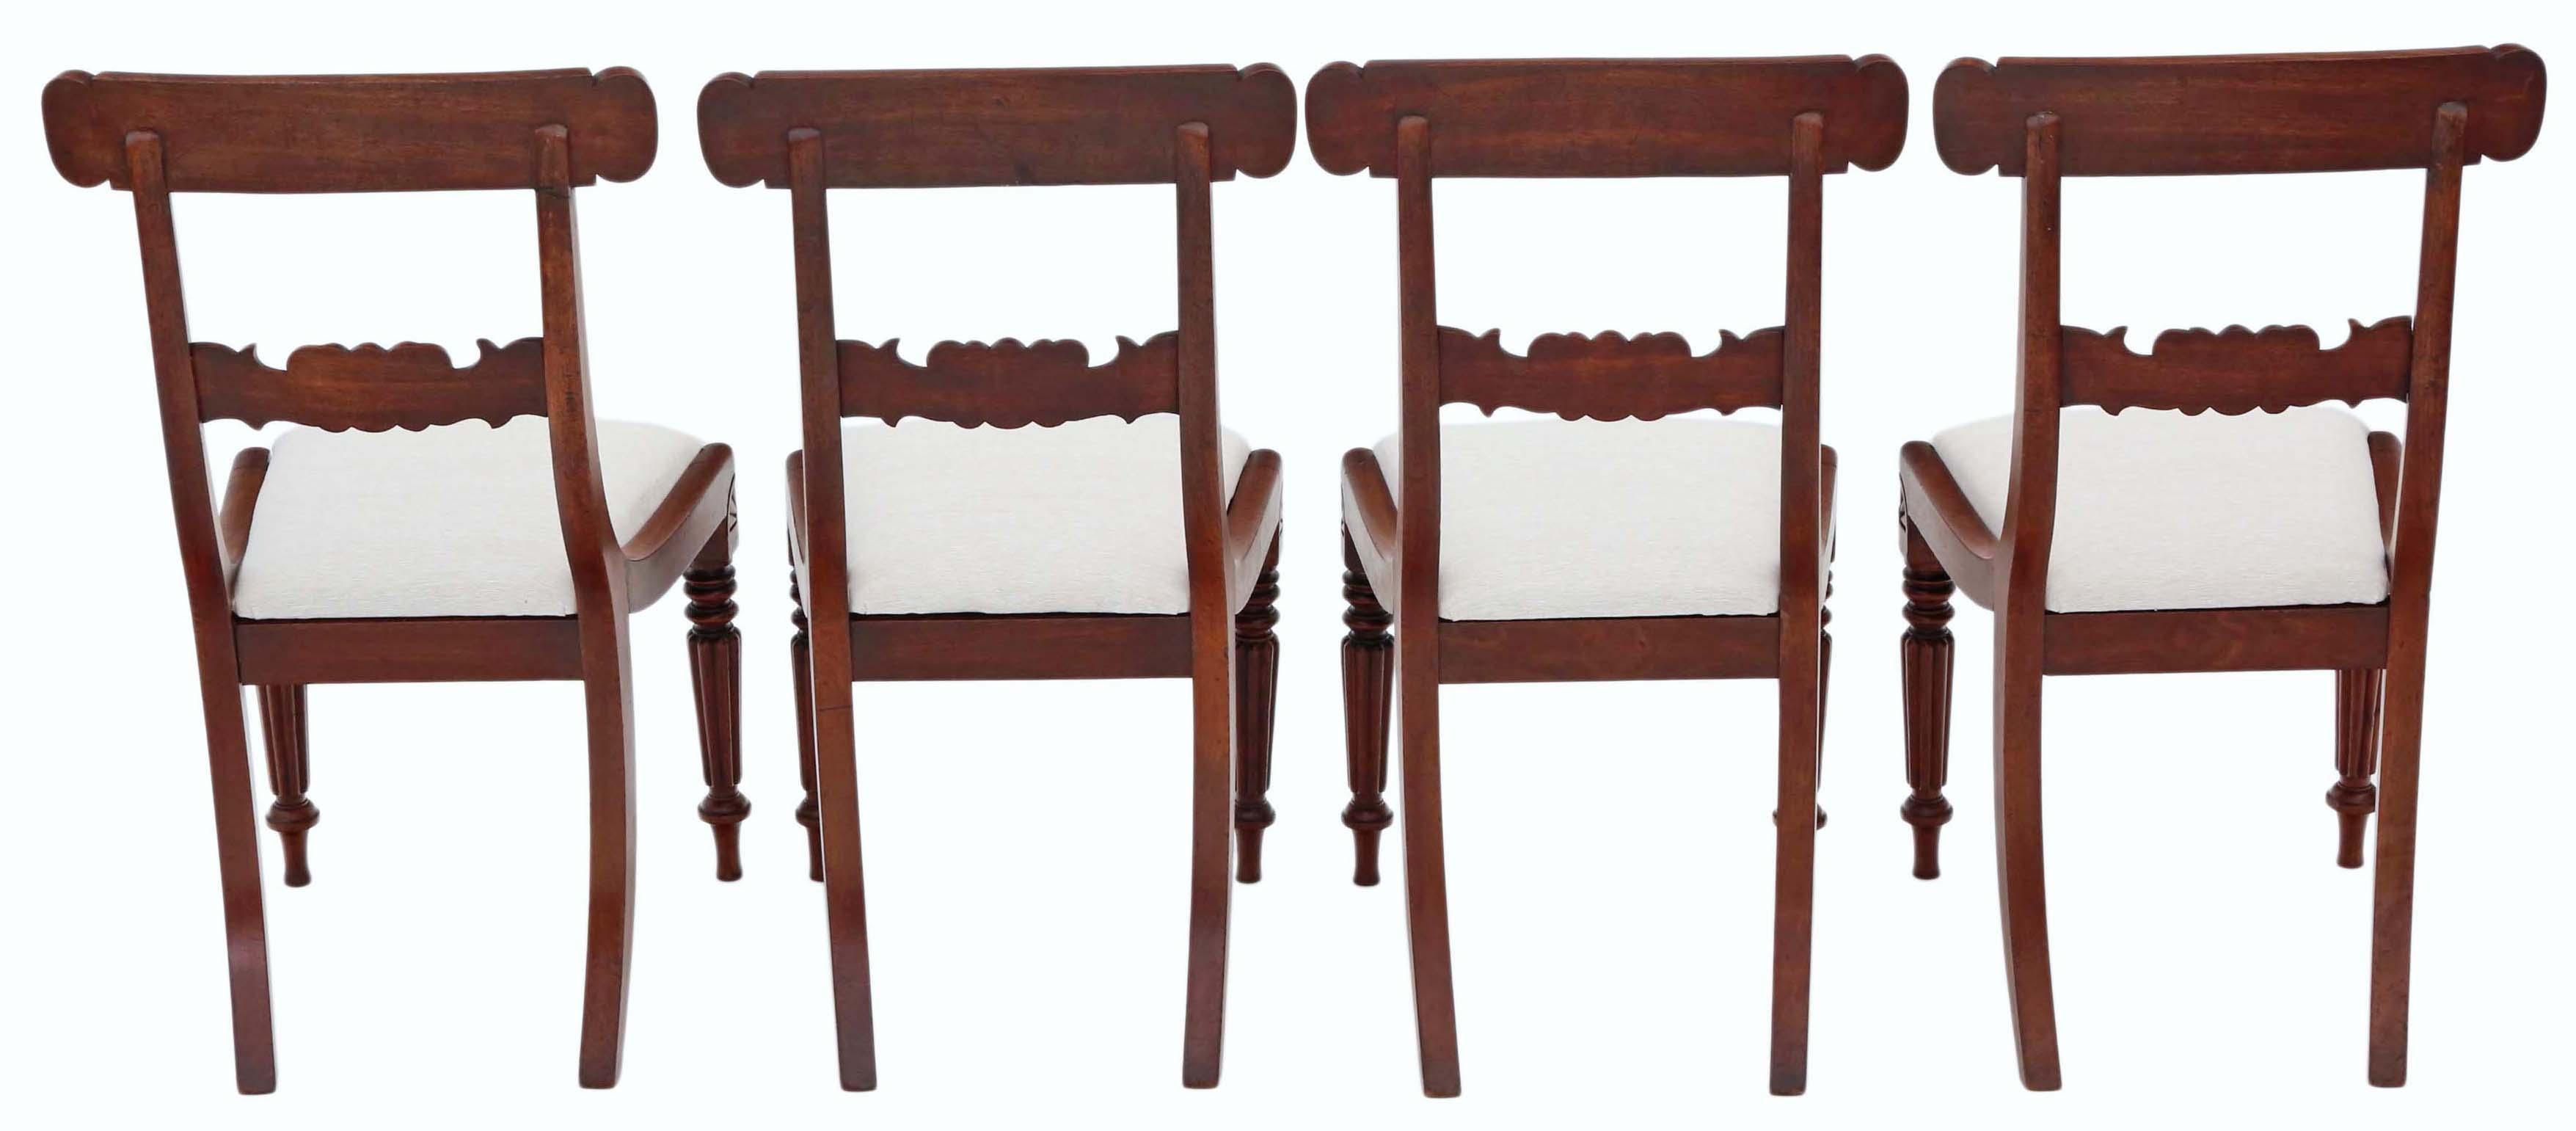 Antique set of 4 William IV carved mahogany dining chairs dating back to approximately 1835, featuring impressive melon-fluted legs.

These chairs are robust, substantial, and well-crafted with no loose joints. Recently upholstered in a durable,